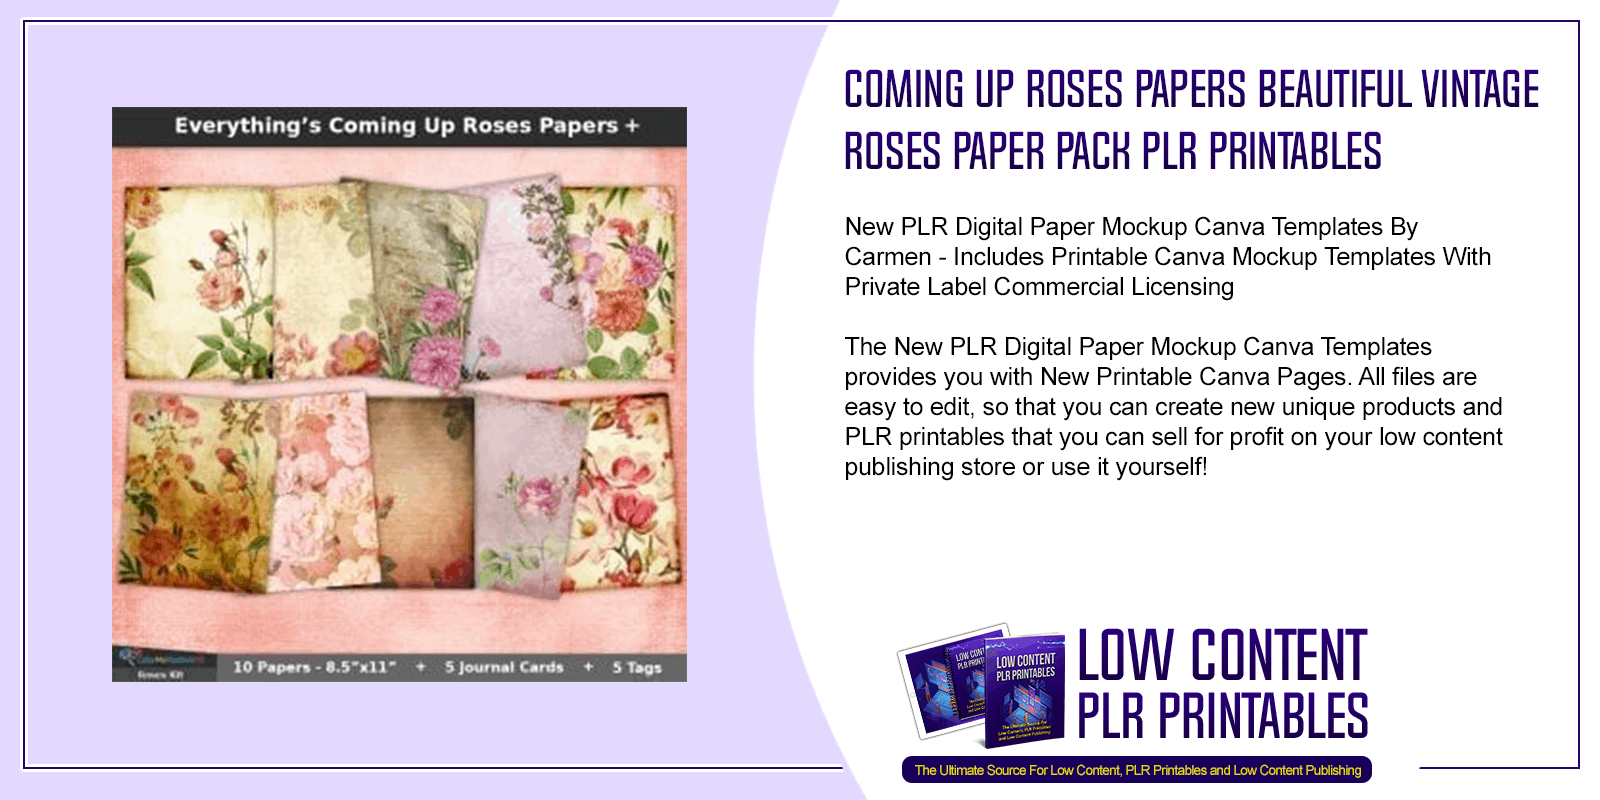 Coming Up Roses Papers Beautiful Vintage Roses Paper Pack PLR Printables